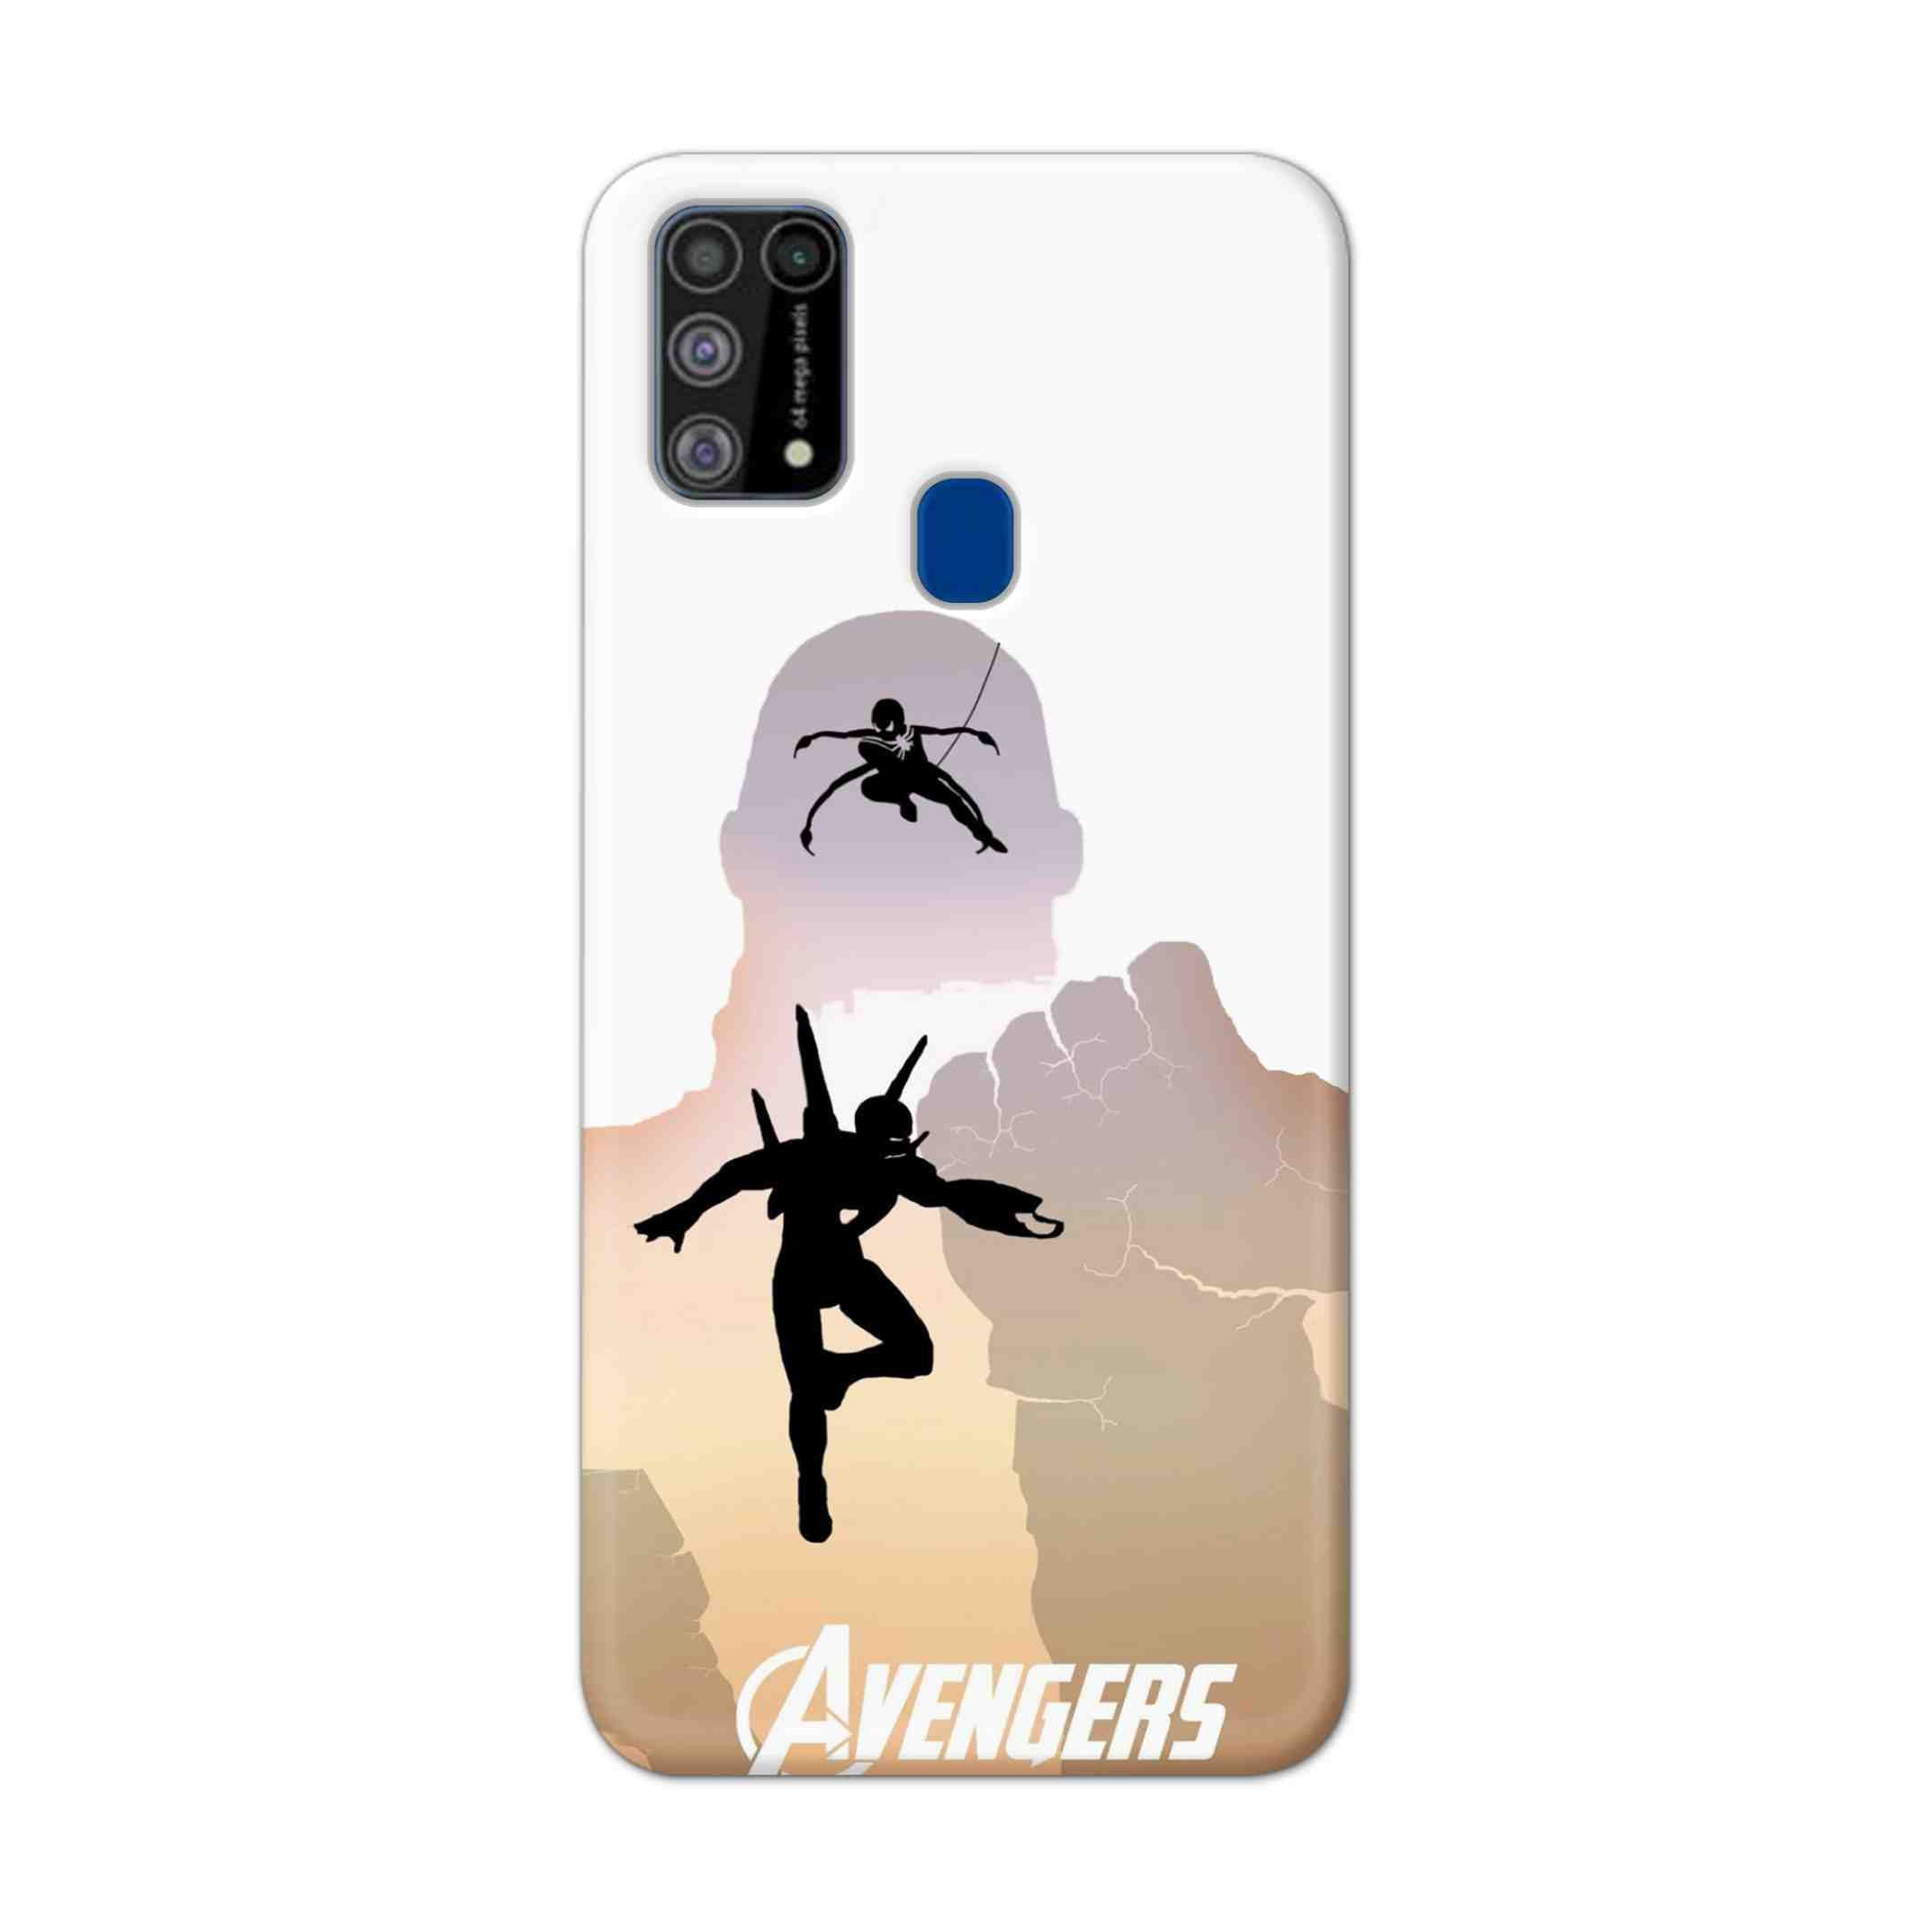 Buy Iron Man Vs Spiderman Hard Back Mobile Phone Case Cover For Samsung Galaxy M31 Online